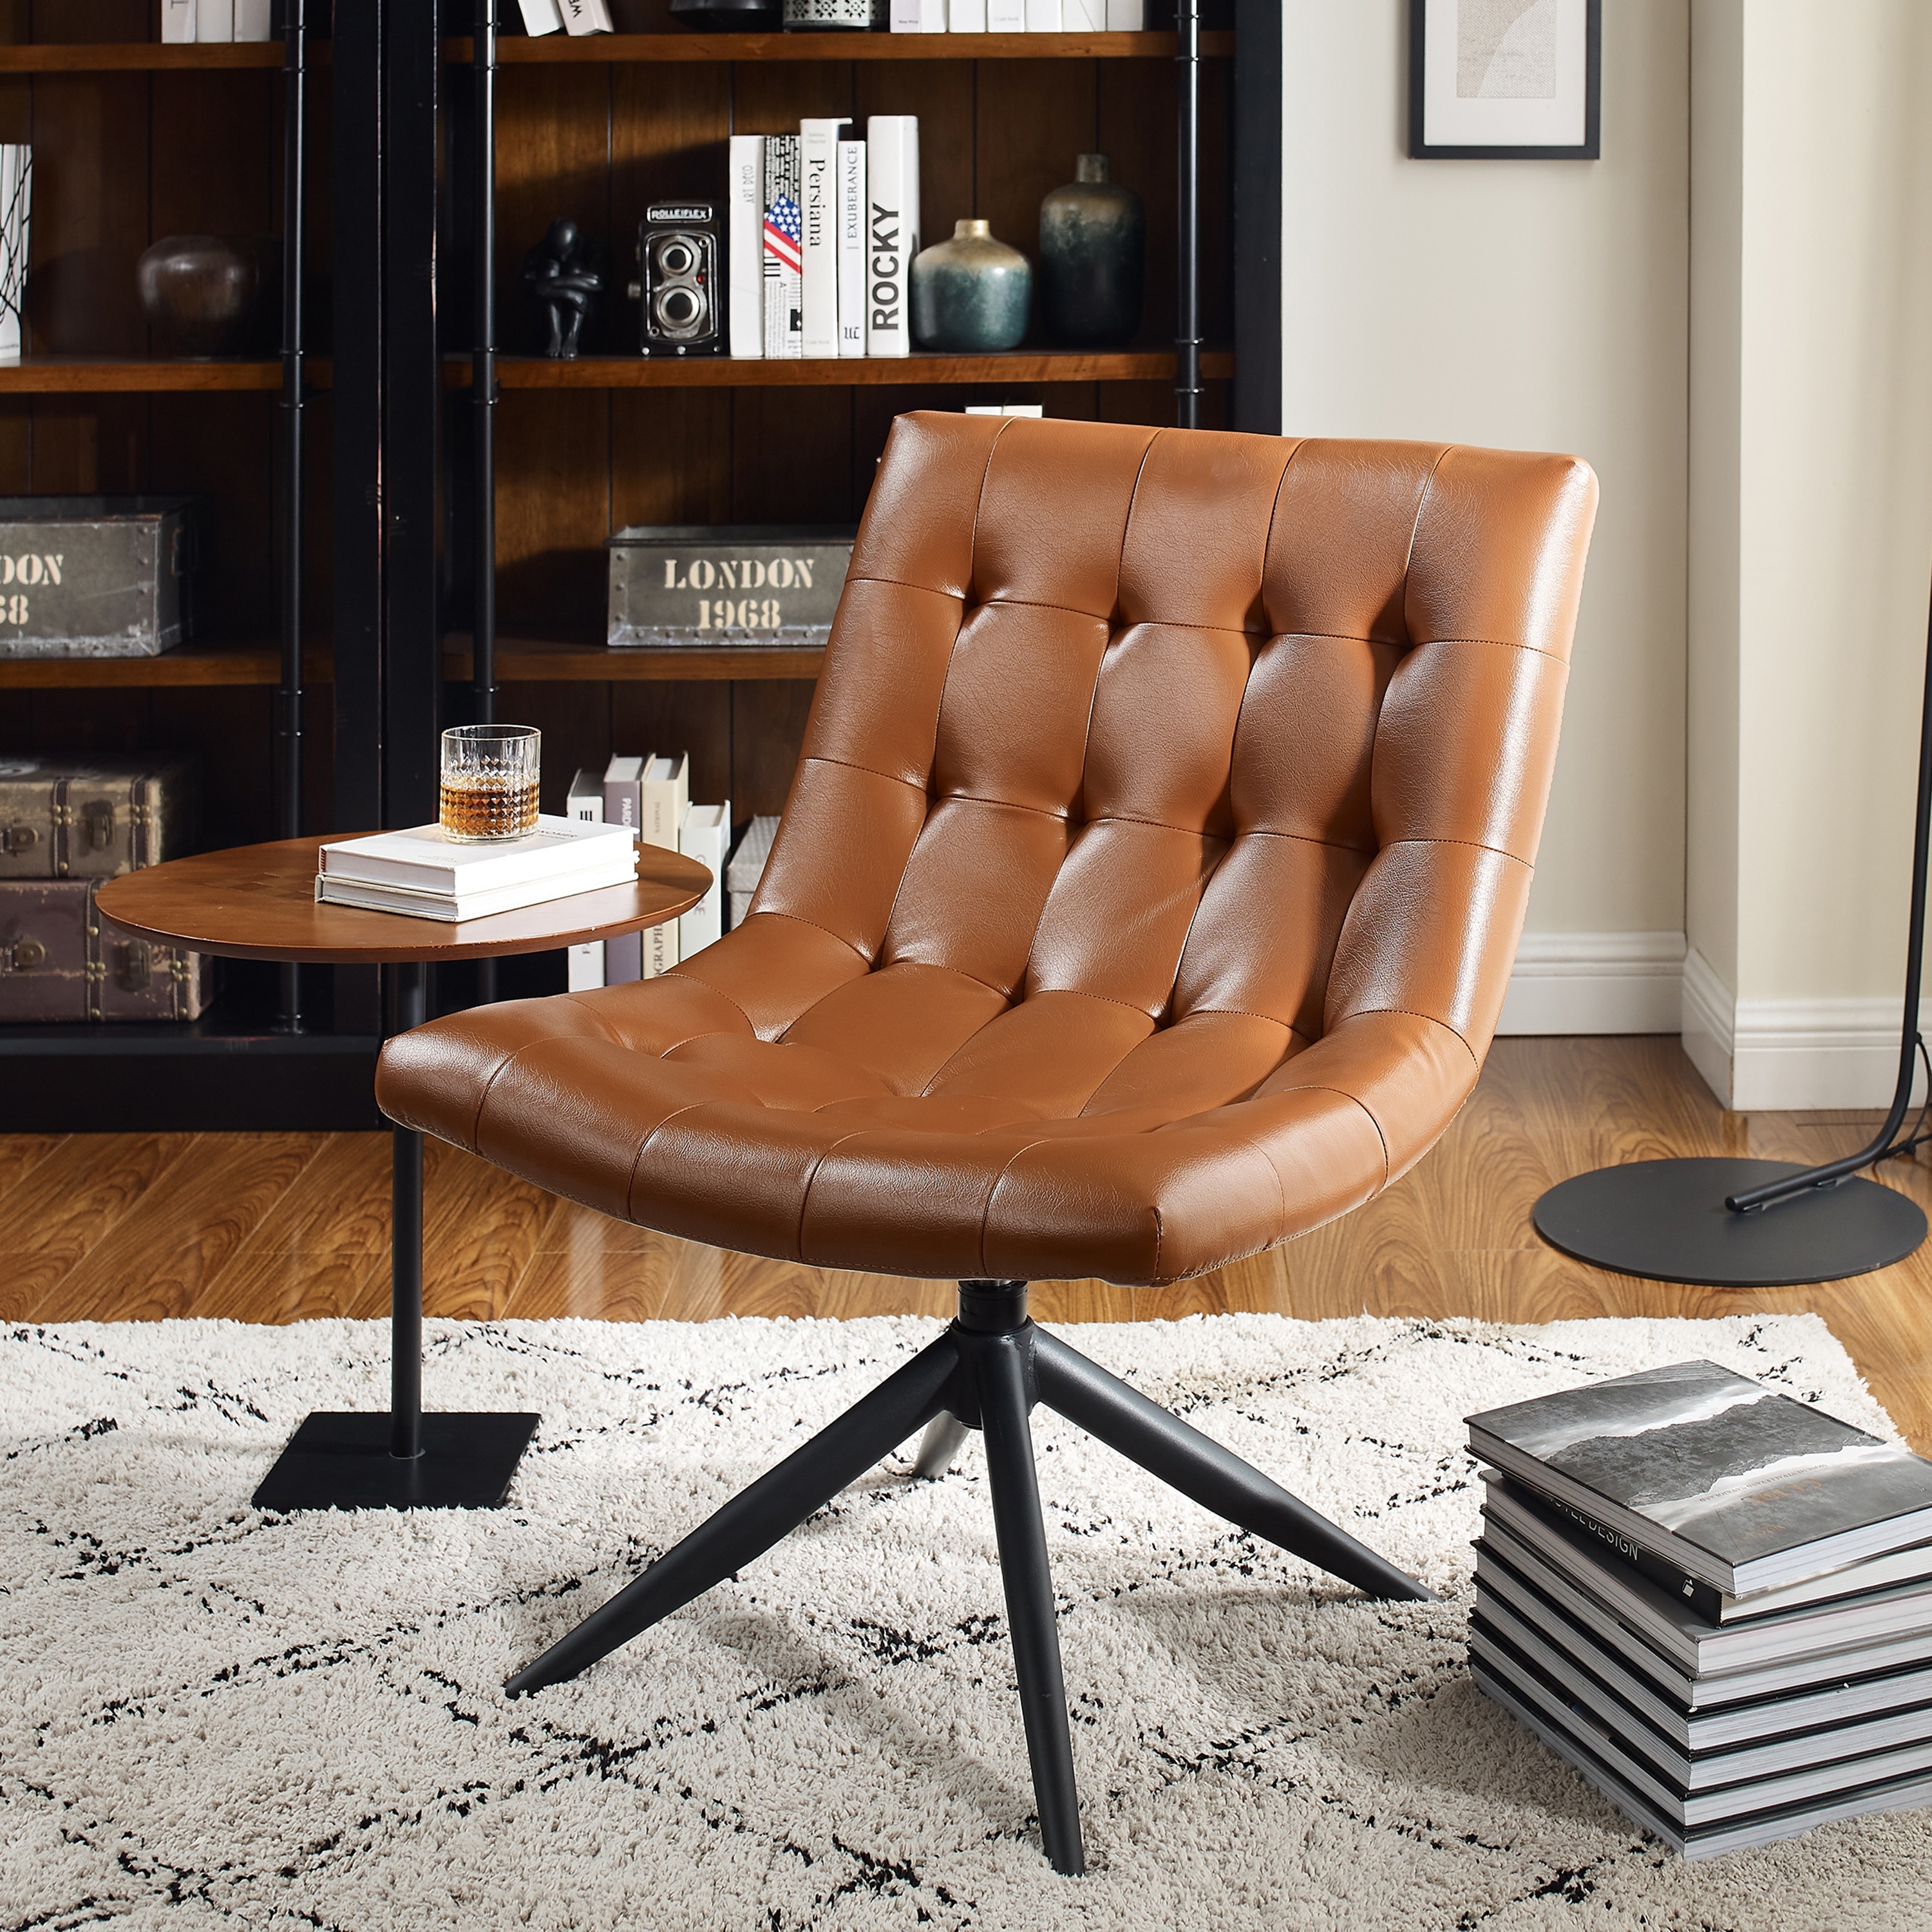 https://ak1.ostkcdn.com/images/products/is/images/direct/d9ff9f872d43daef028d186921f4f29470cef6b3/Art-Leon-Swivel-Home-Office-Accent-Chair.jpg